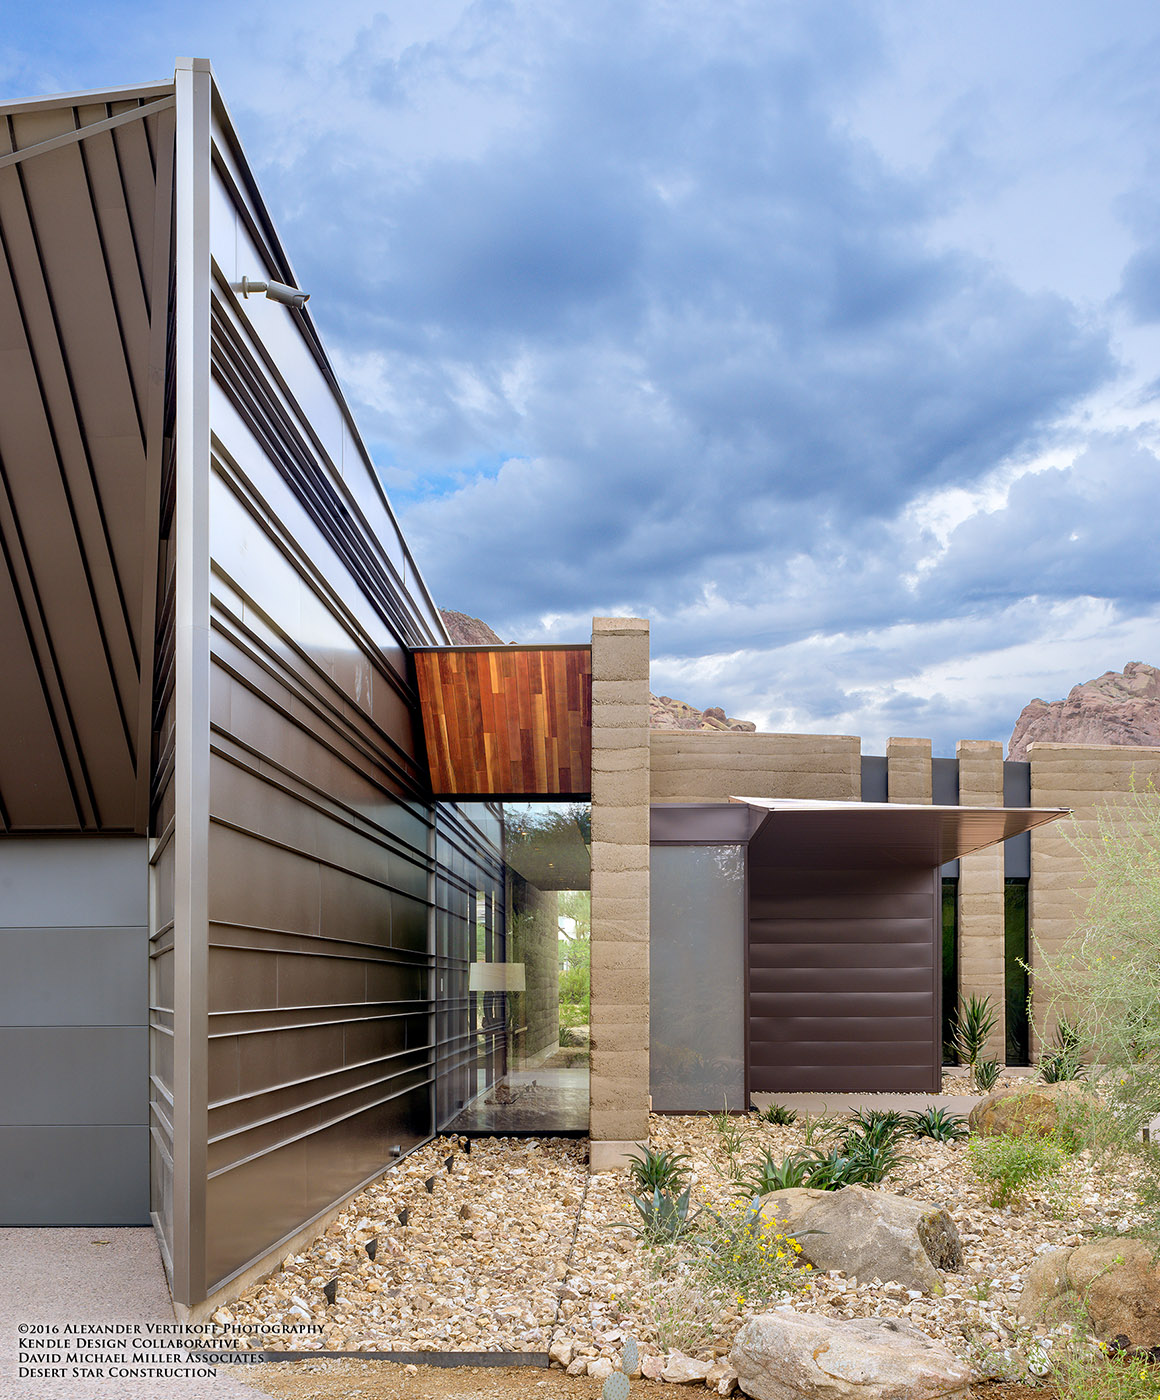 Playful collection of organic shapes in the desert: Dancing Light Residence